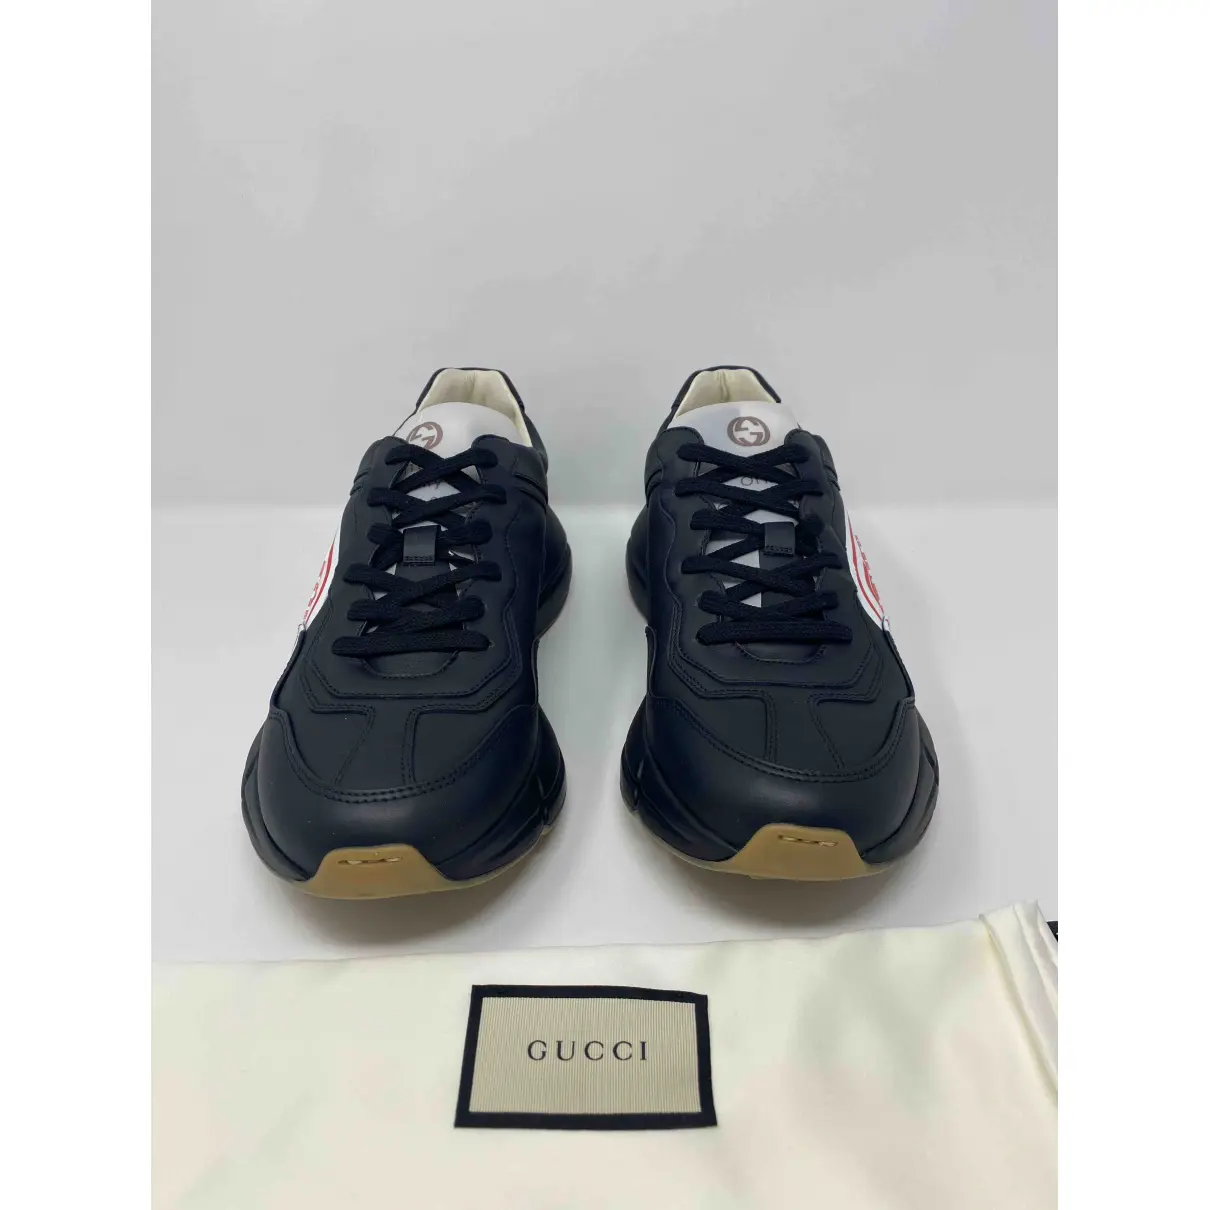 Buy Gucci Rhyton leather low trainers online